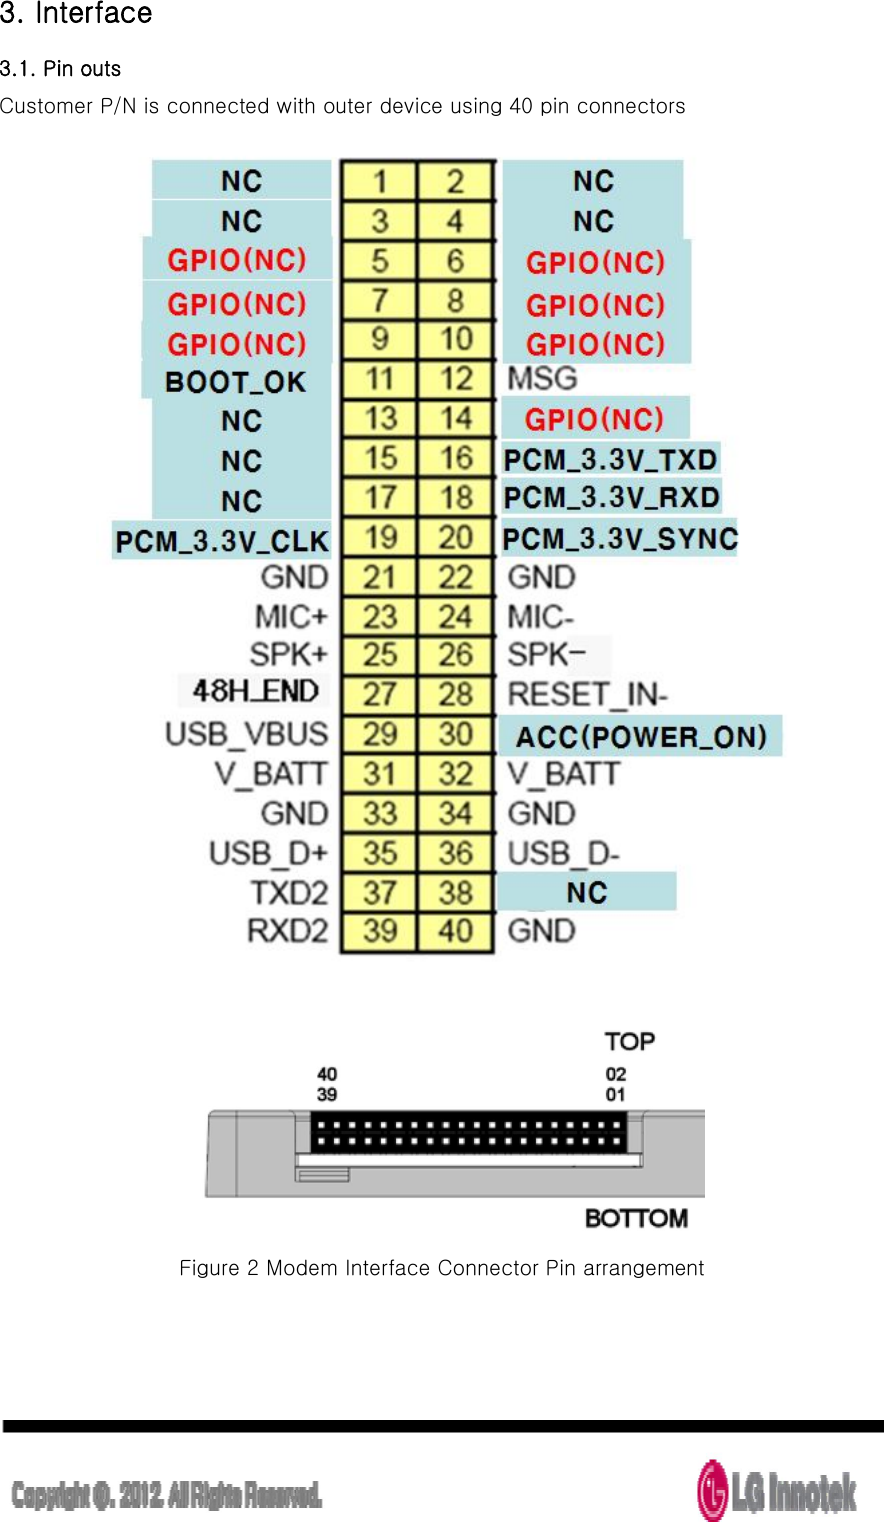  3. Interface   3.1. Pin outs Customer P/N is connected with outer device using 40 pin connectors   Figure 2 Modem Interface Connector Pin arrangement 